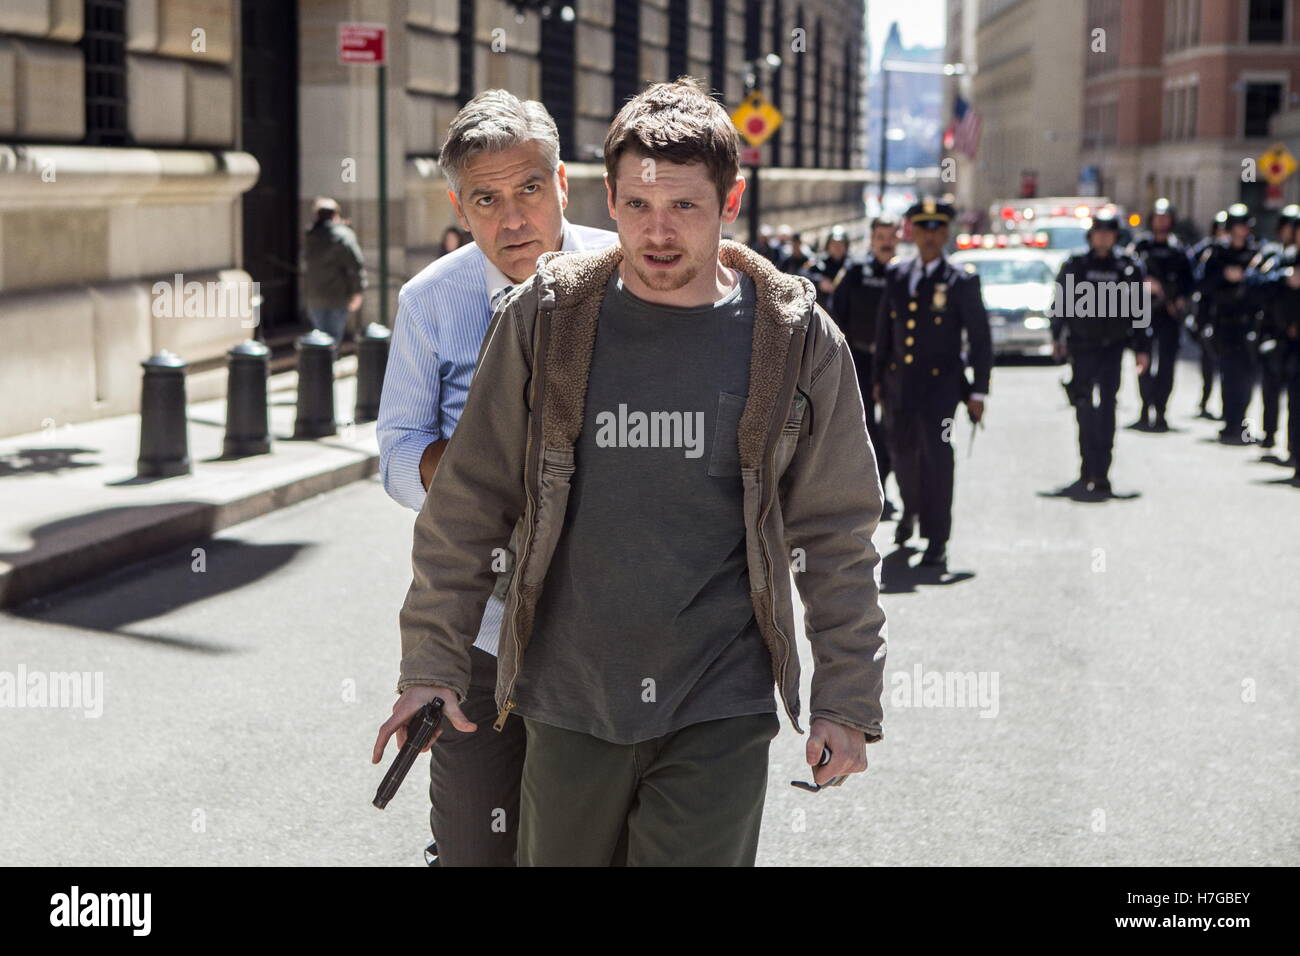 RELEASE DATE: May 13, 2016 TITLE: Money Monster STUDIO: TriStar Pictures DIRECTOR: Jodie Foster PLOT: Financial TV host Lee Gates and his producer Patty are put in an extreme situation when an irate investor takes over their studio PICTURED: George Clooney as Lee Gates, Jack O'Connell as Kyle Budwell (Credit: c TriStar Pictures/Entertainment Pictures/) Stock Photo